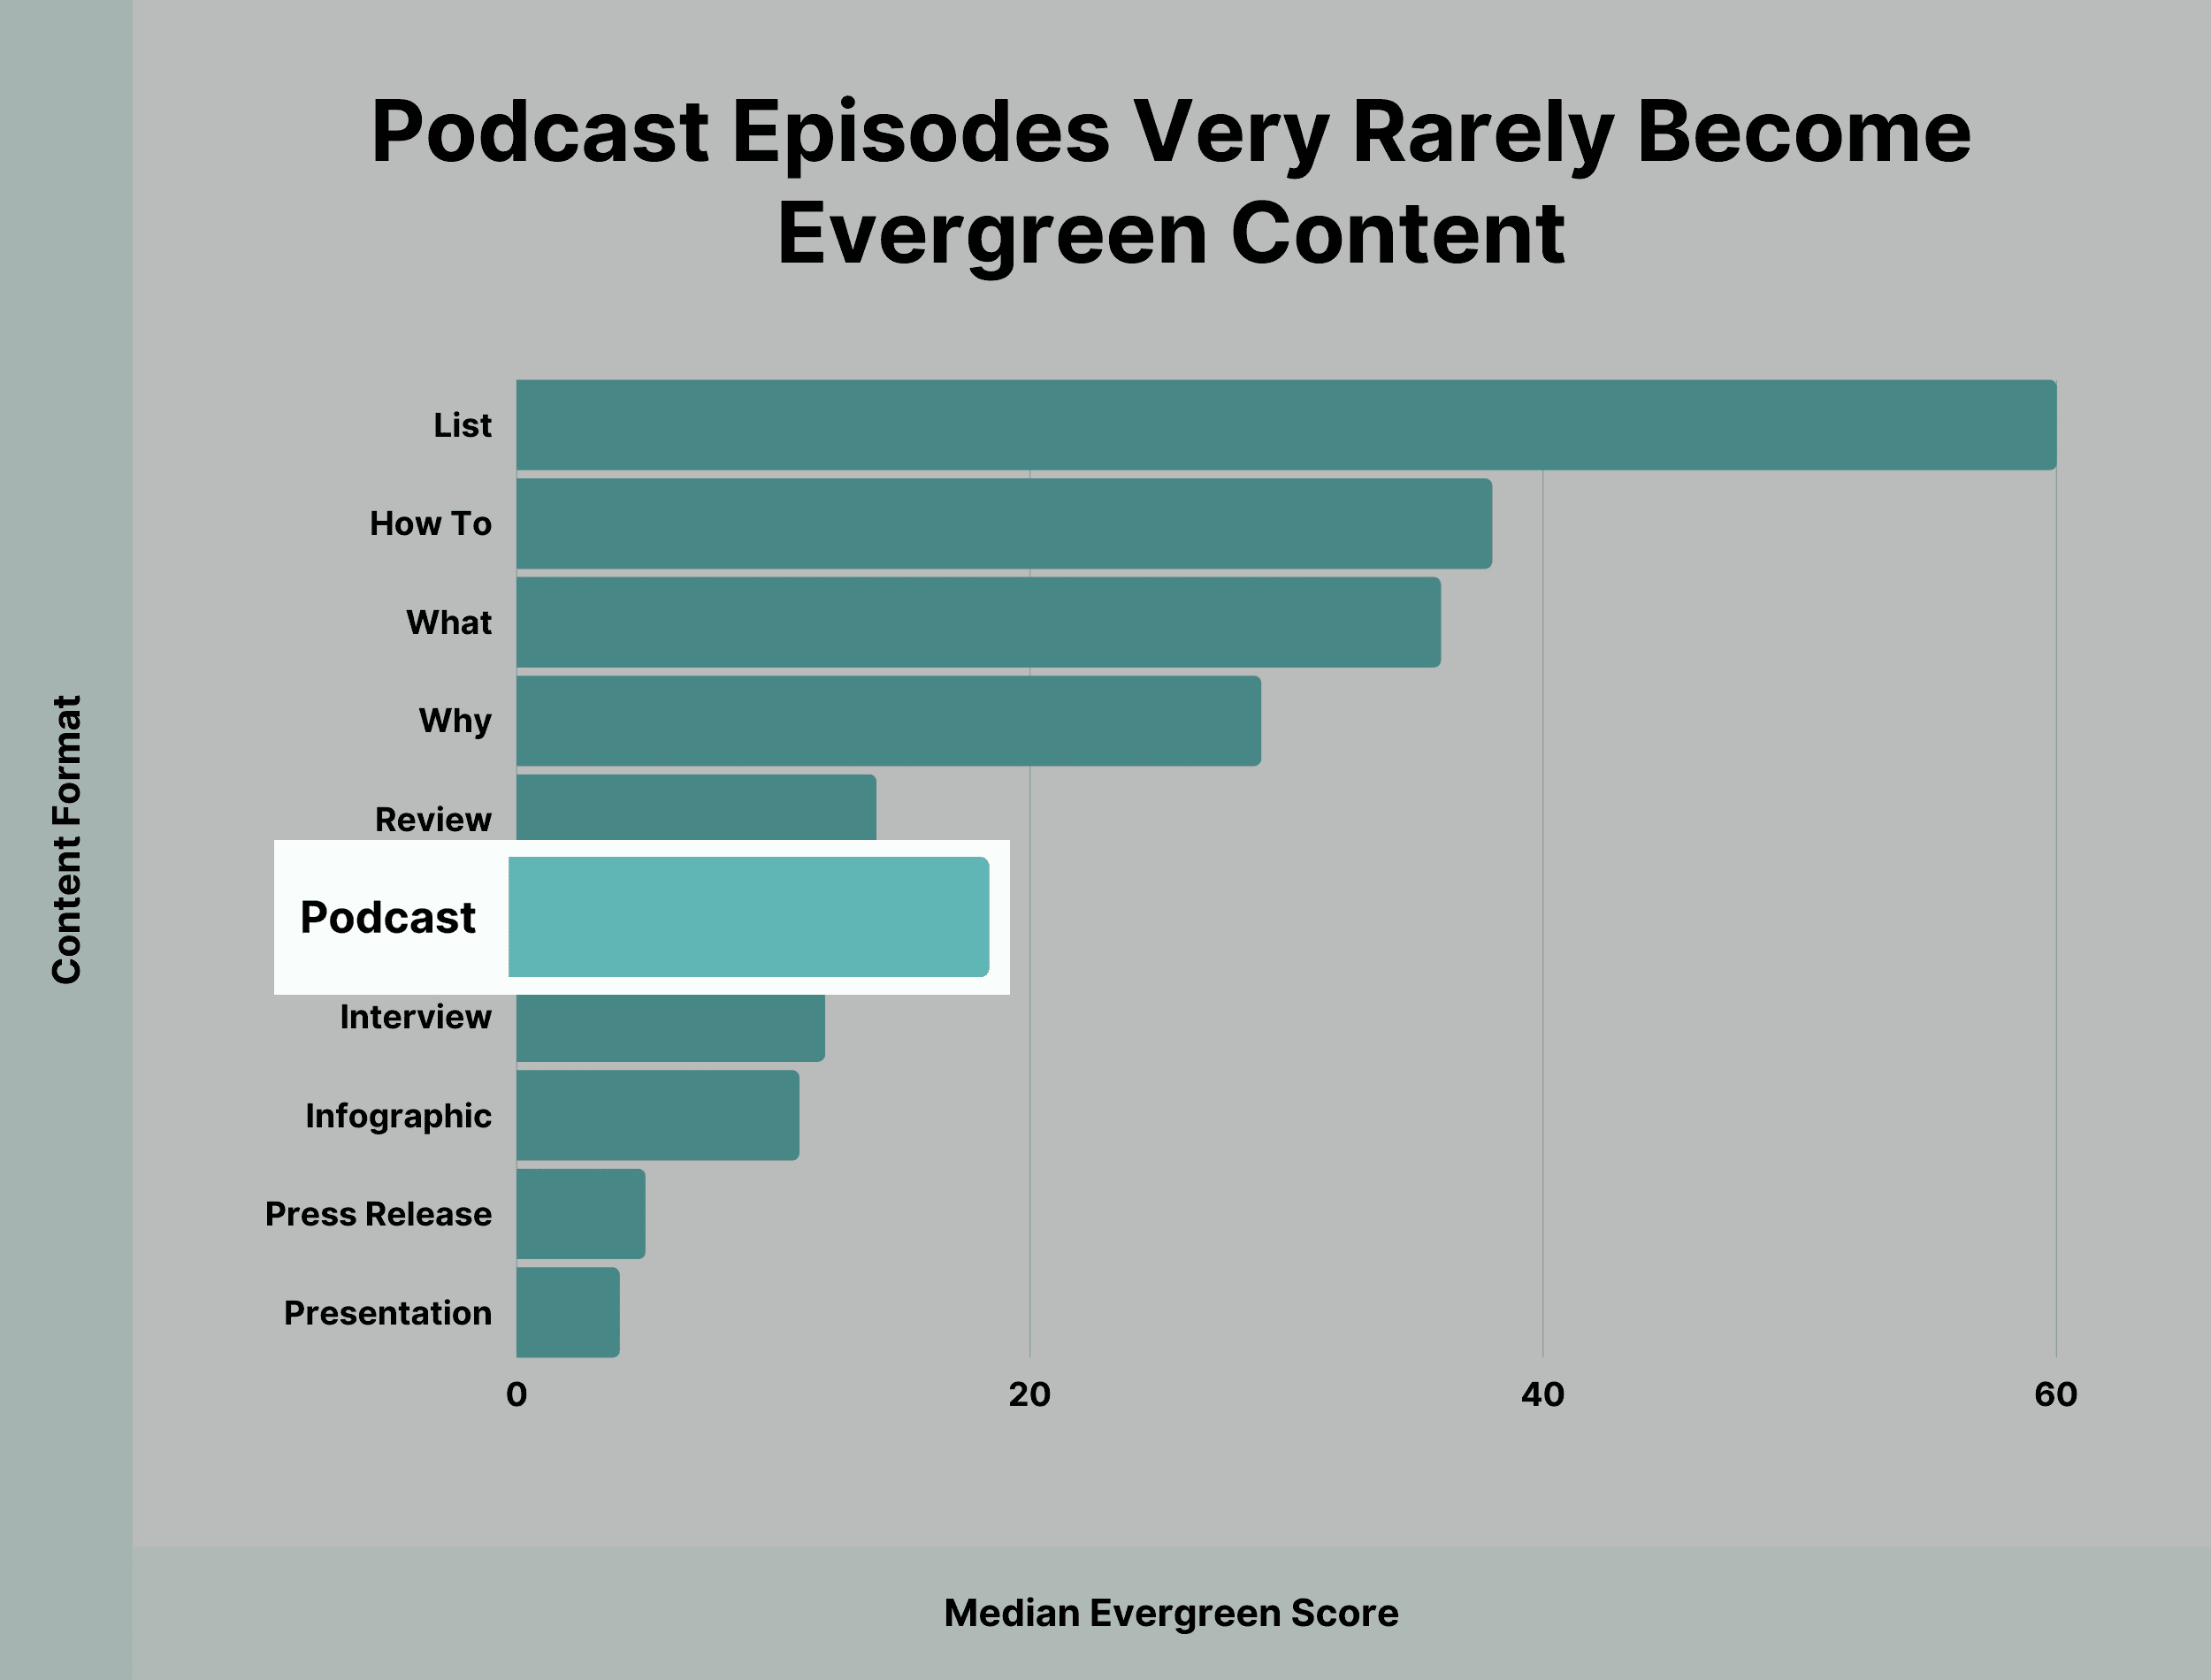 Podcast episodes very rarely become evergreen content